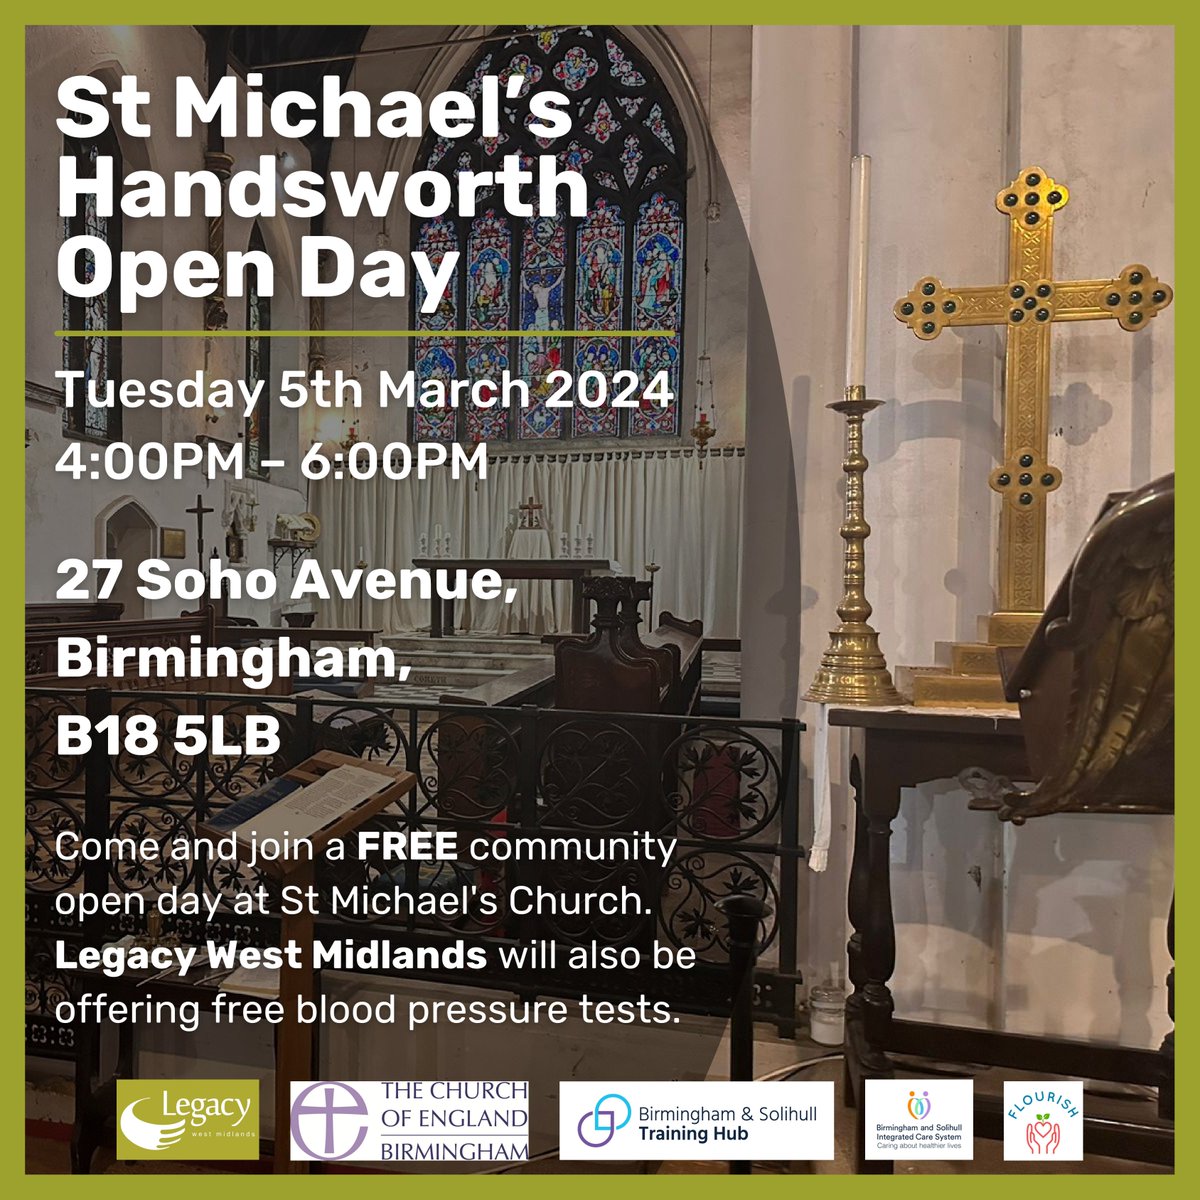 Come and join us for a FREE community open day at @churchofengland⛪️ on Tuesday 5th March from 4PM – 6PM where we will also be offering FREE #bloodpressure tests 💪🏽 📍27 Soho Avenue, Birmingham, B18 5LB All are welcome so please share! 😊👍🏽